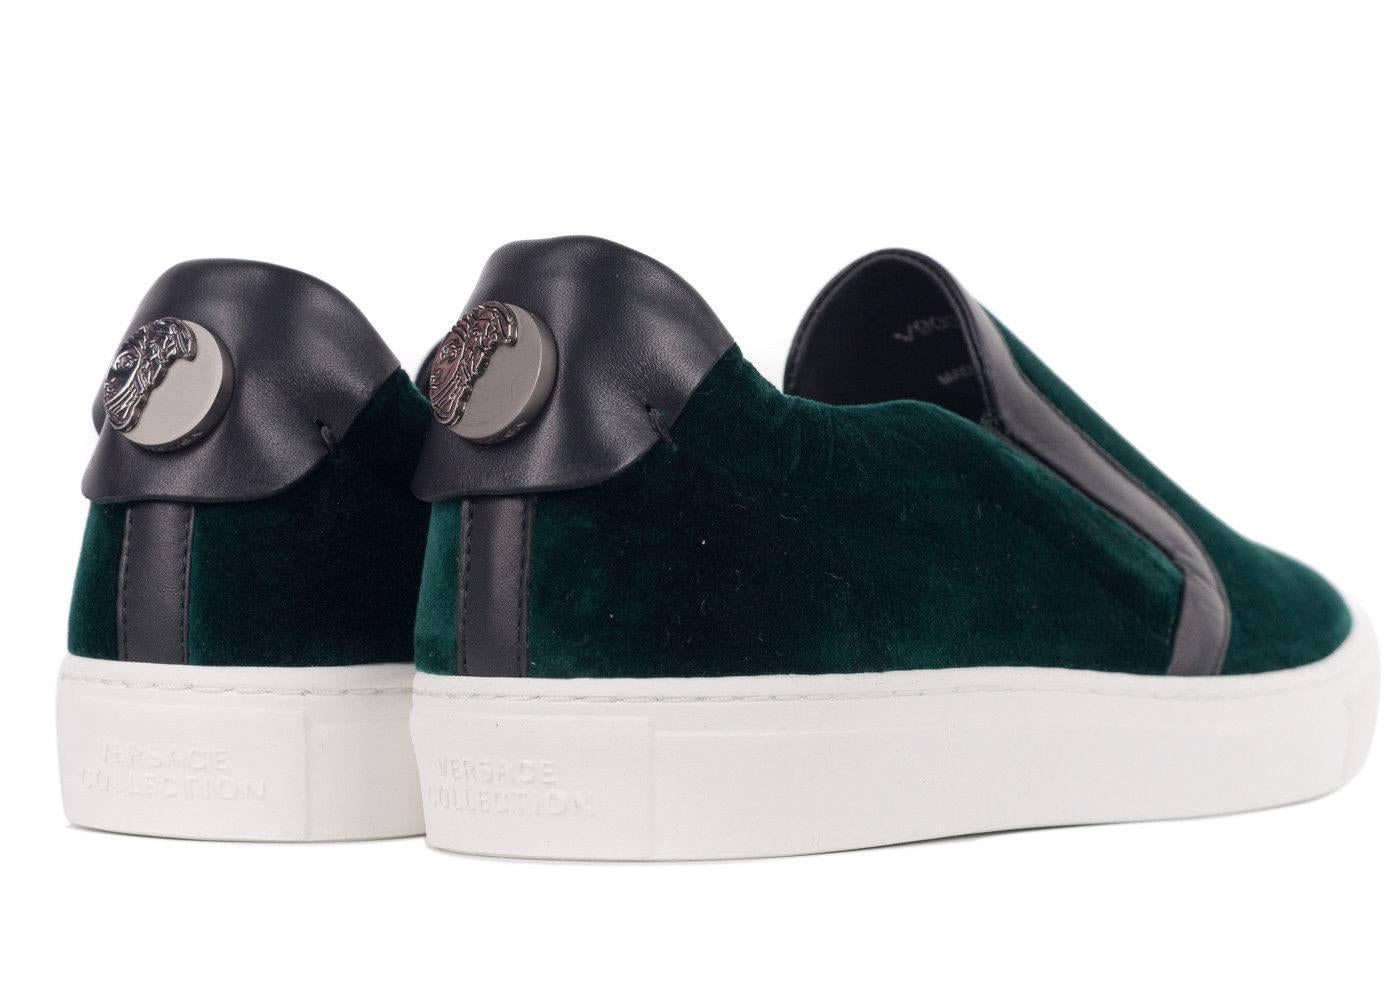 Versace Collection Emerald Green Velvet Slip On Sneakers In New Condition For Sale In Brooklyn, NY